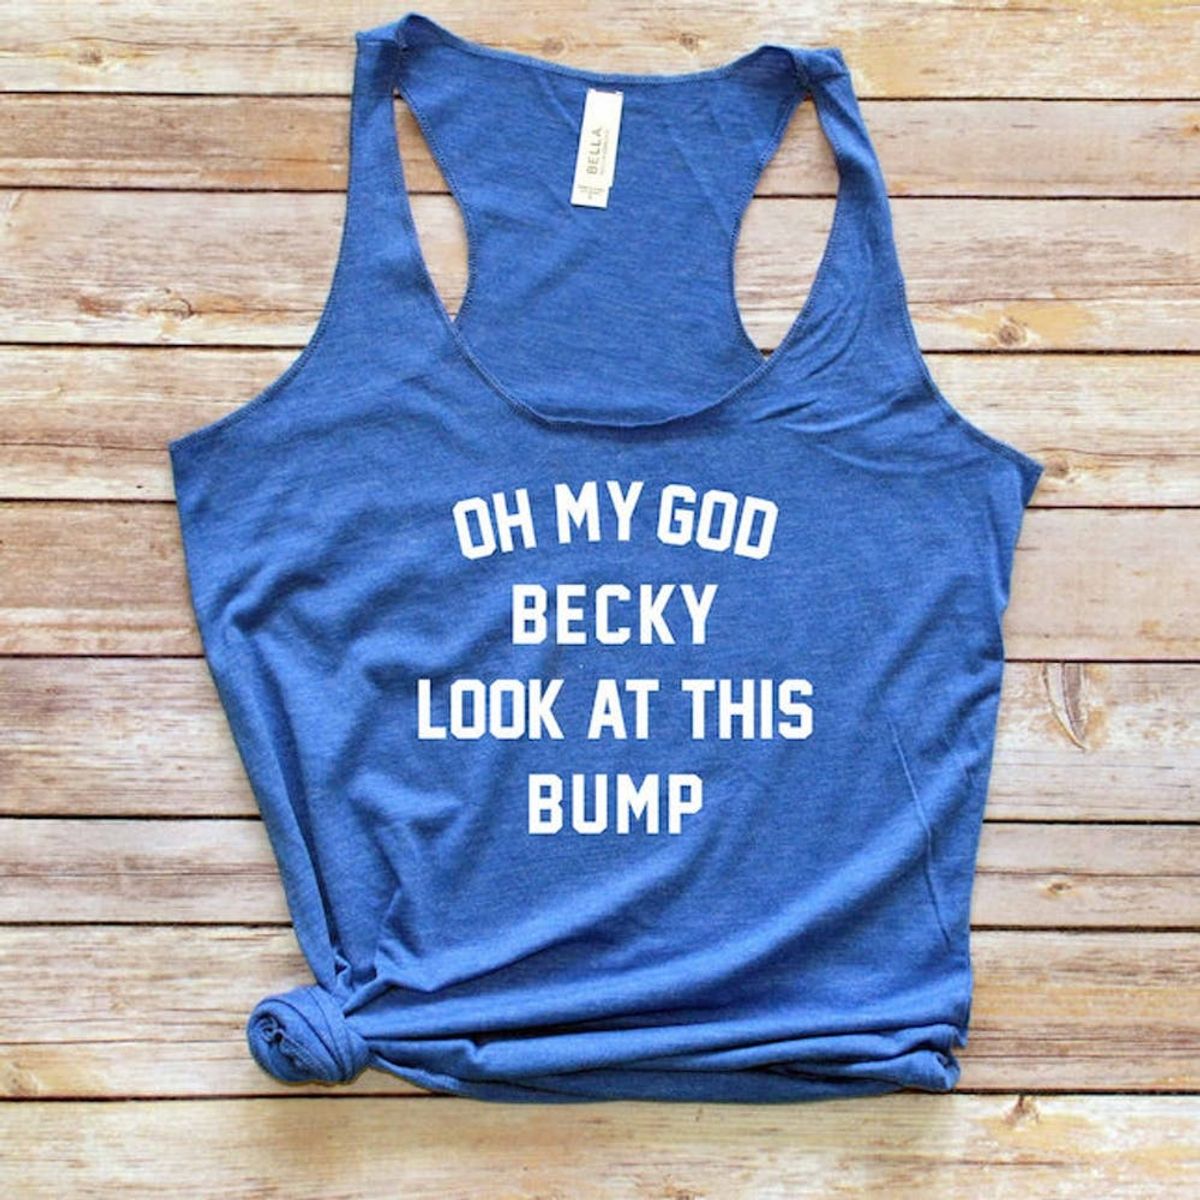 11 Soft T-Shirts That Will Give Pregnant Women a Good Laugh